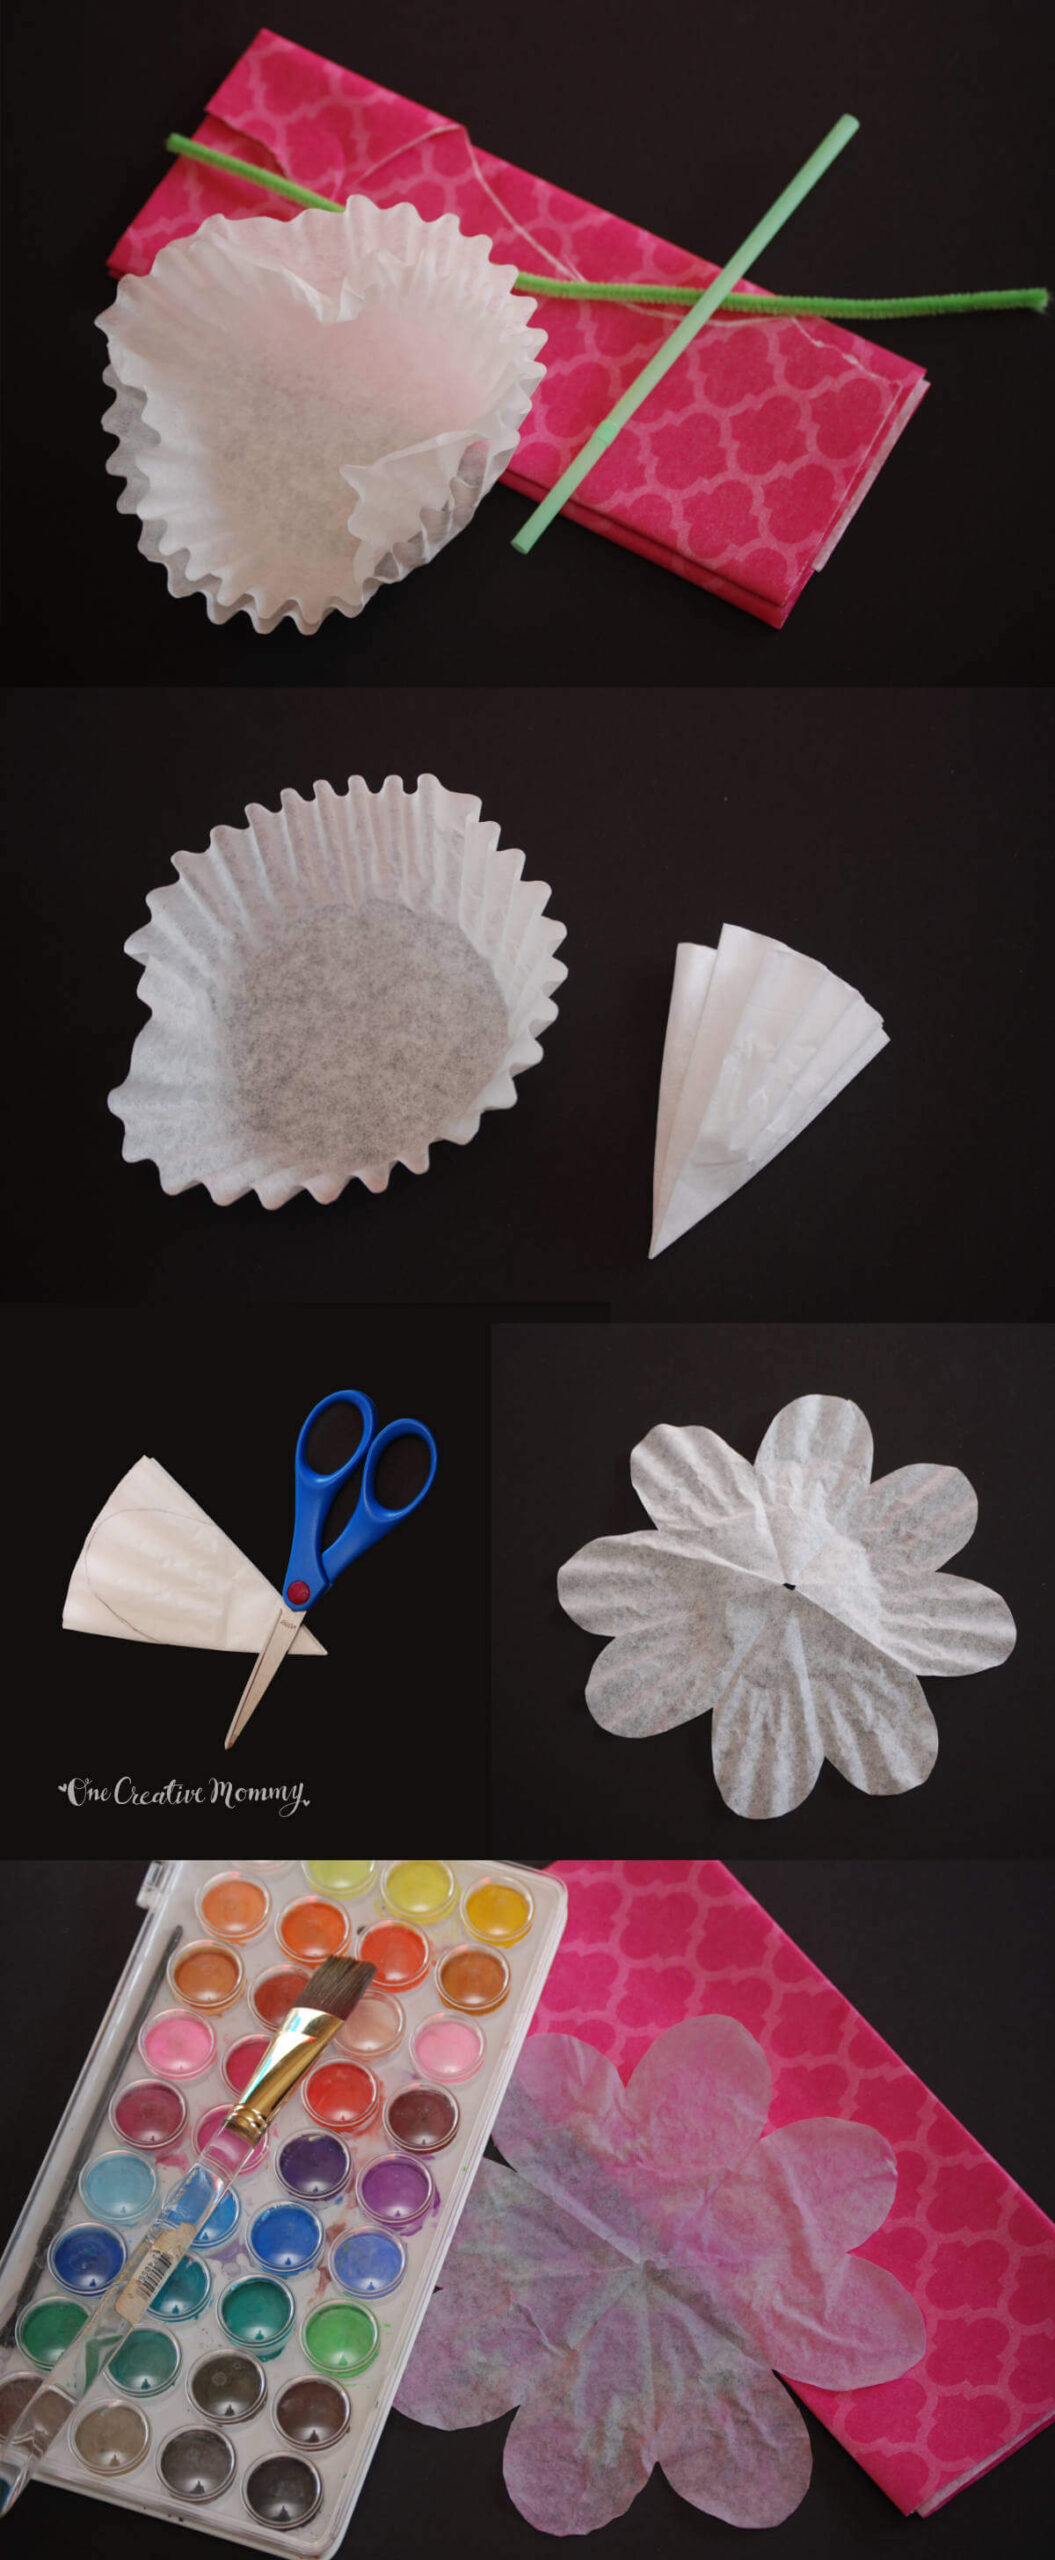 Step-by-step images of the process of creating coffee filter flowers